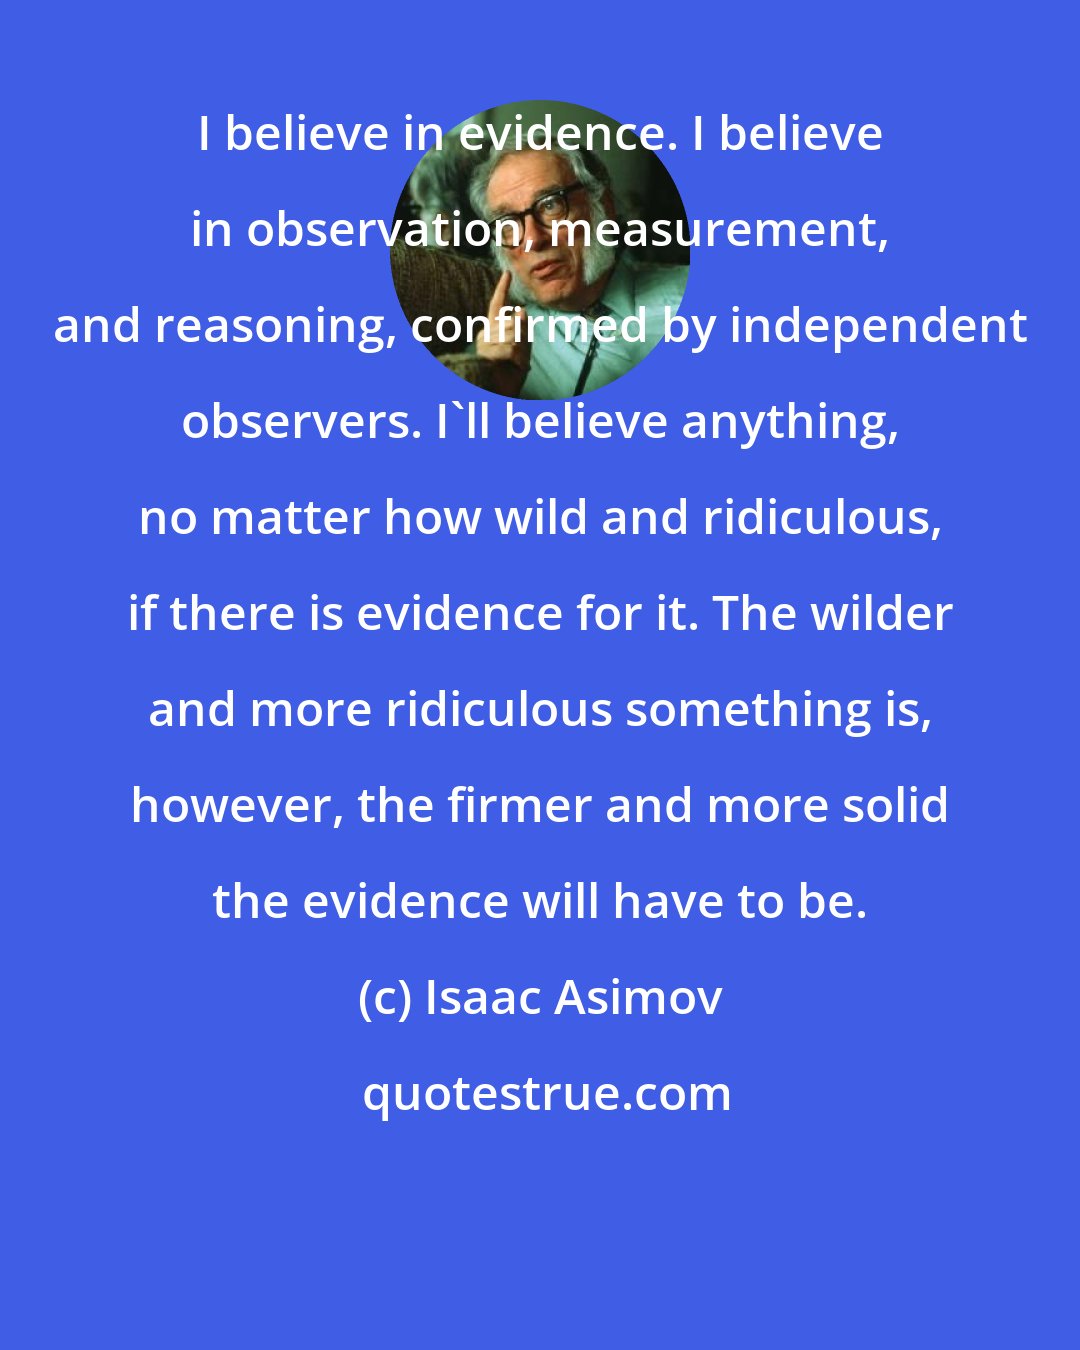 Isaac Asimov: I believe in evidence. I believe in observation, measurement, and reasoning, confirmed by independent observers. I'll believe anything, no matter how wild and ridiculous, if there is evidence for it. The wilder and more ridiculous something is, however, the firmer and more solid the evidence will have to be.